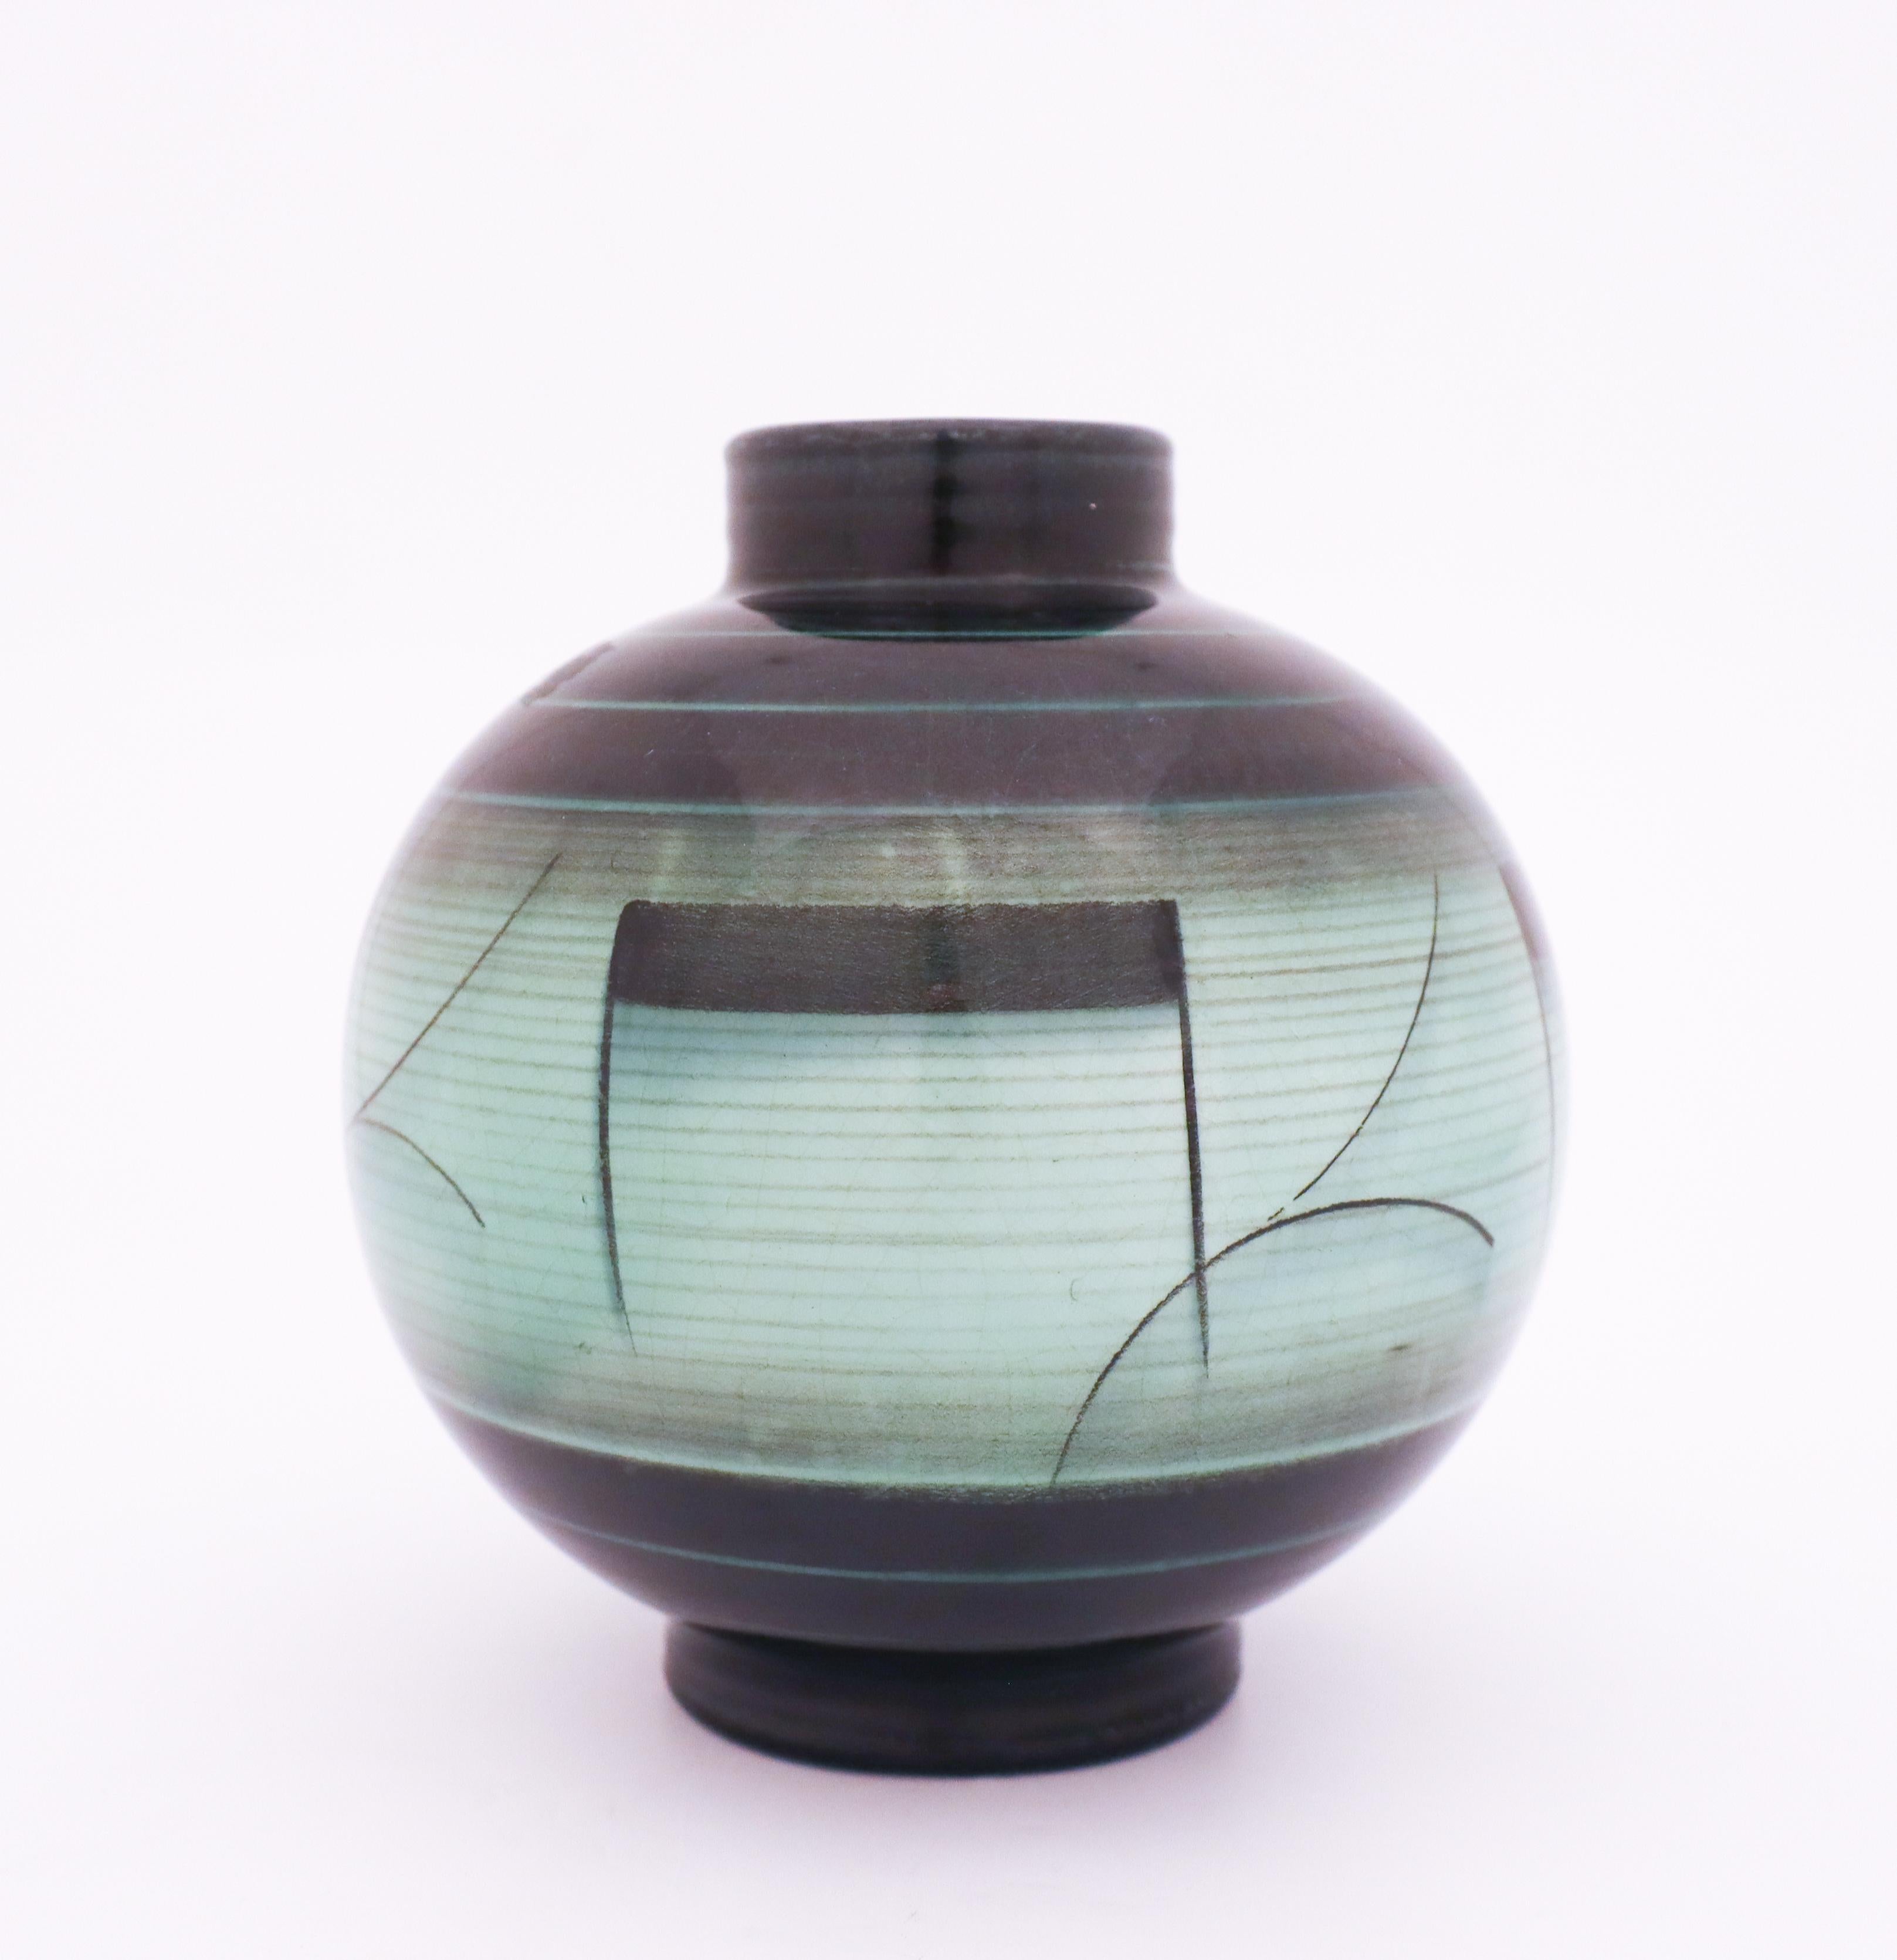 A lovely vase designed by Ilse Claesson in the 1930s at Rörstrand, Sweden. It is 16 cm high and in very good condition except from some craquelure in the glaze because of the age.